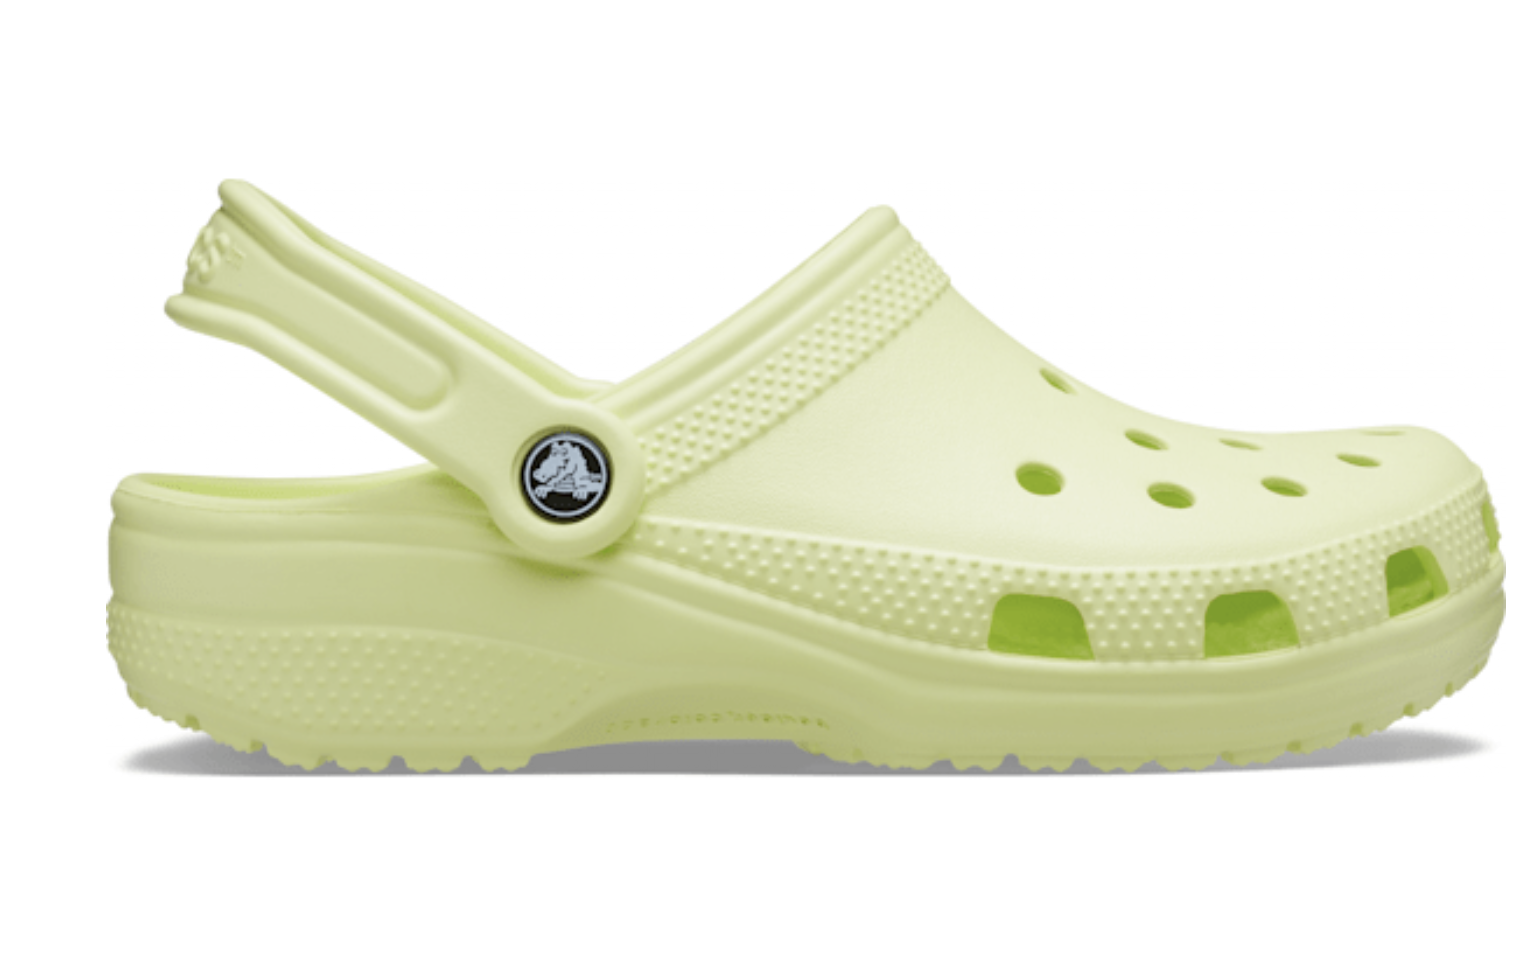 Crocs: up to 50% off sale styles.